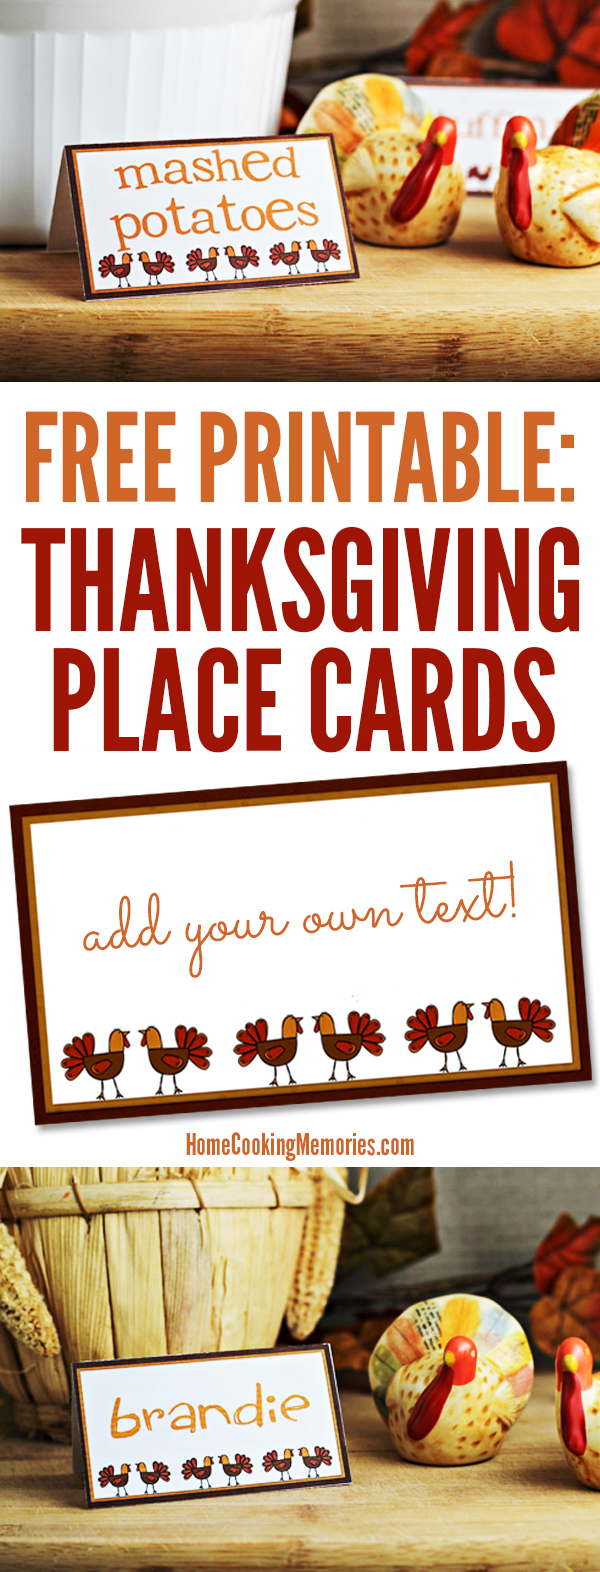 free-thanksgiving-place-cards-printable